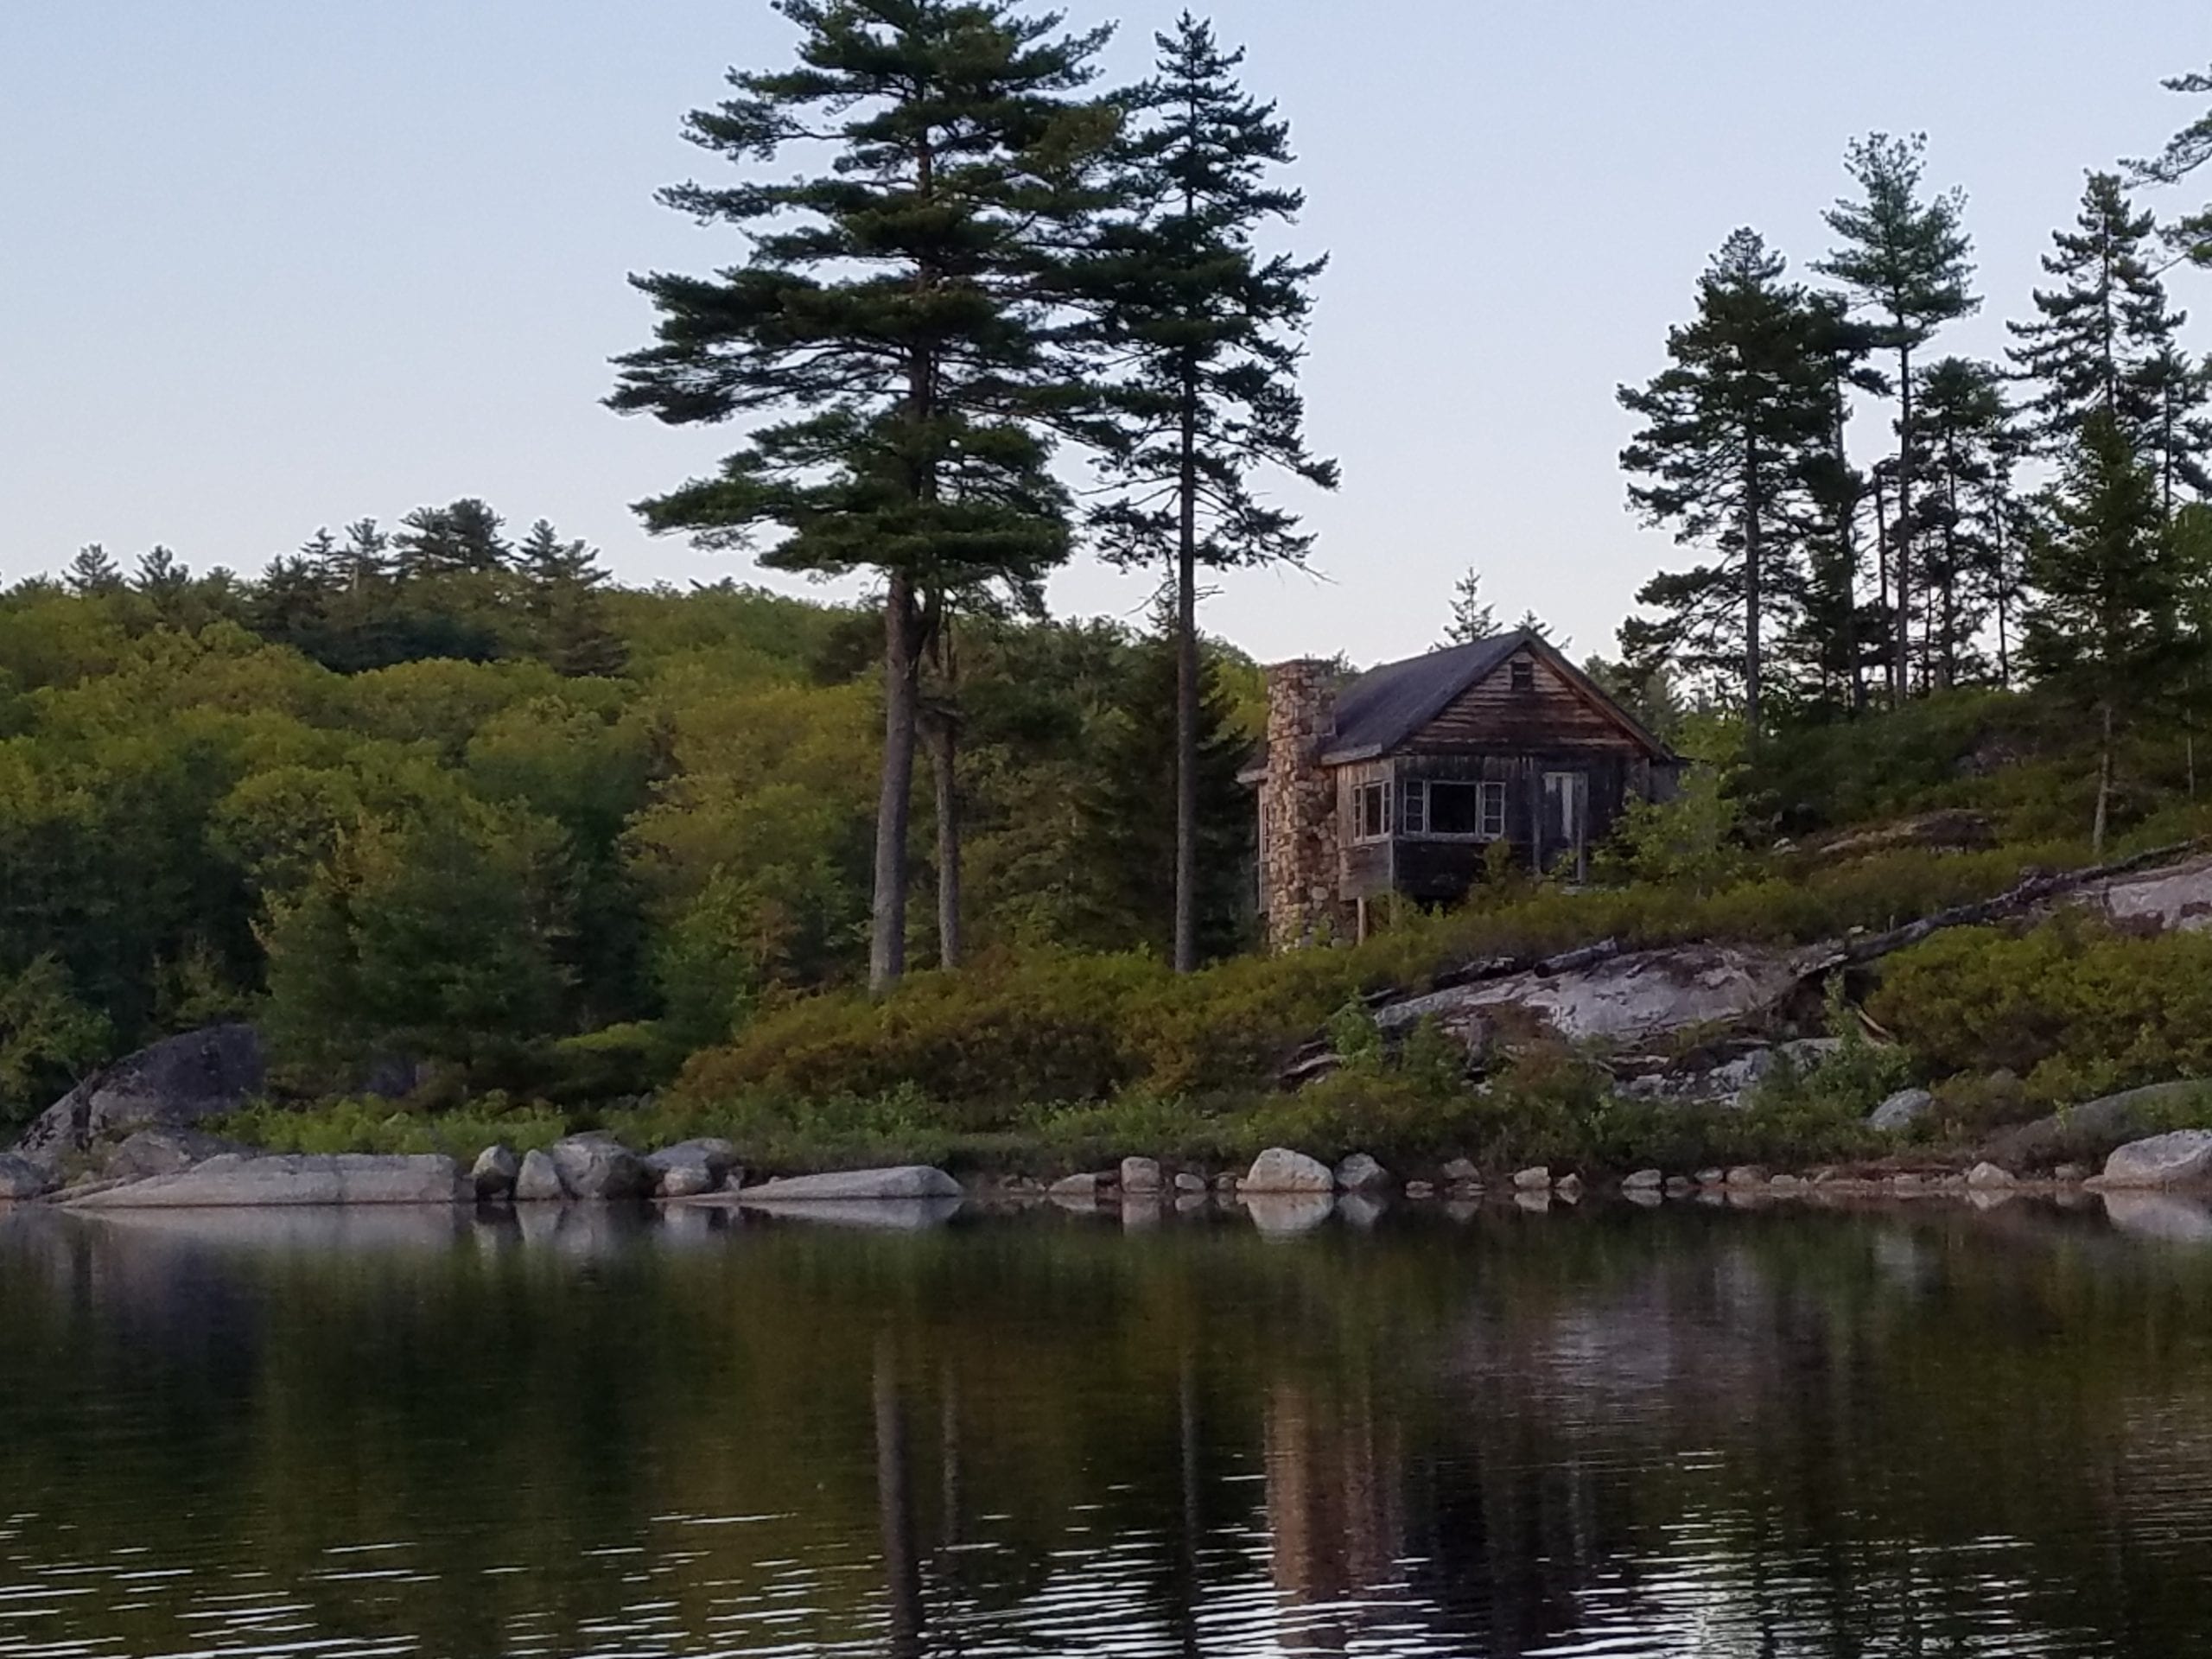 Maine Sporting Camps